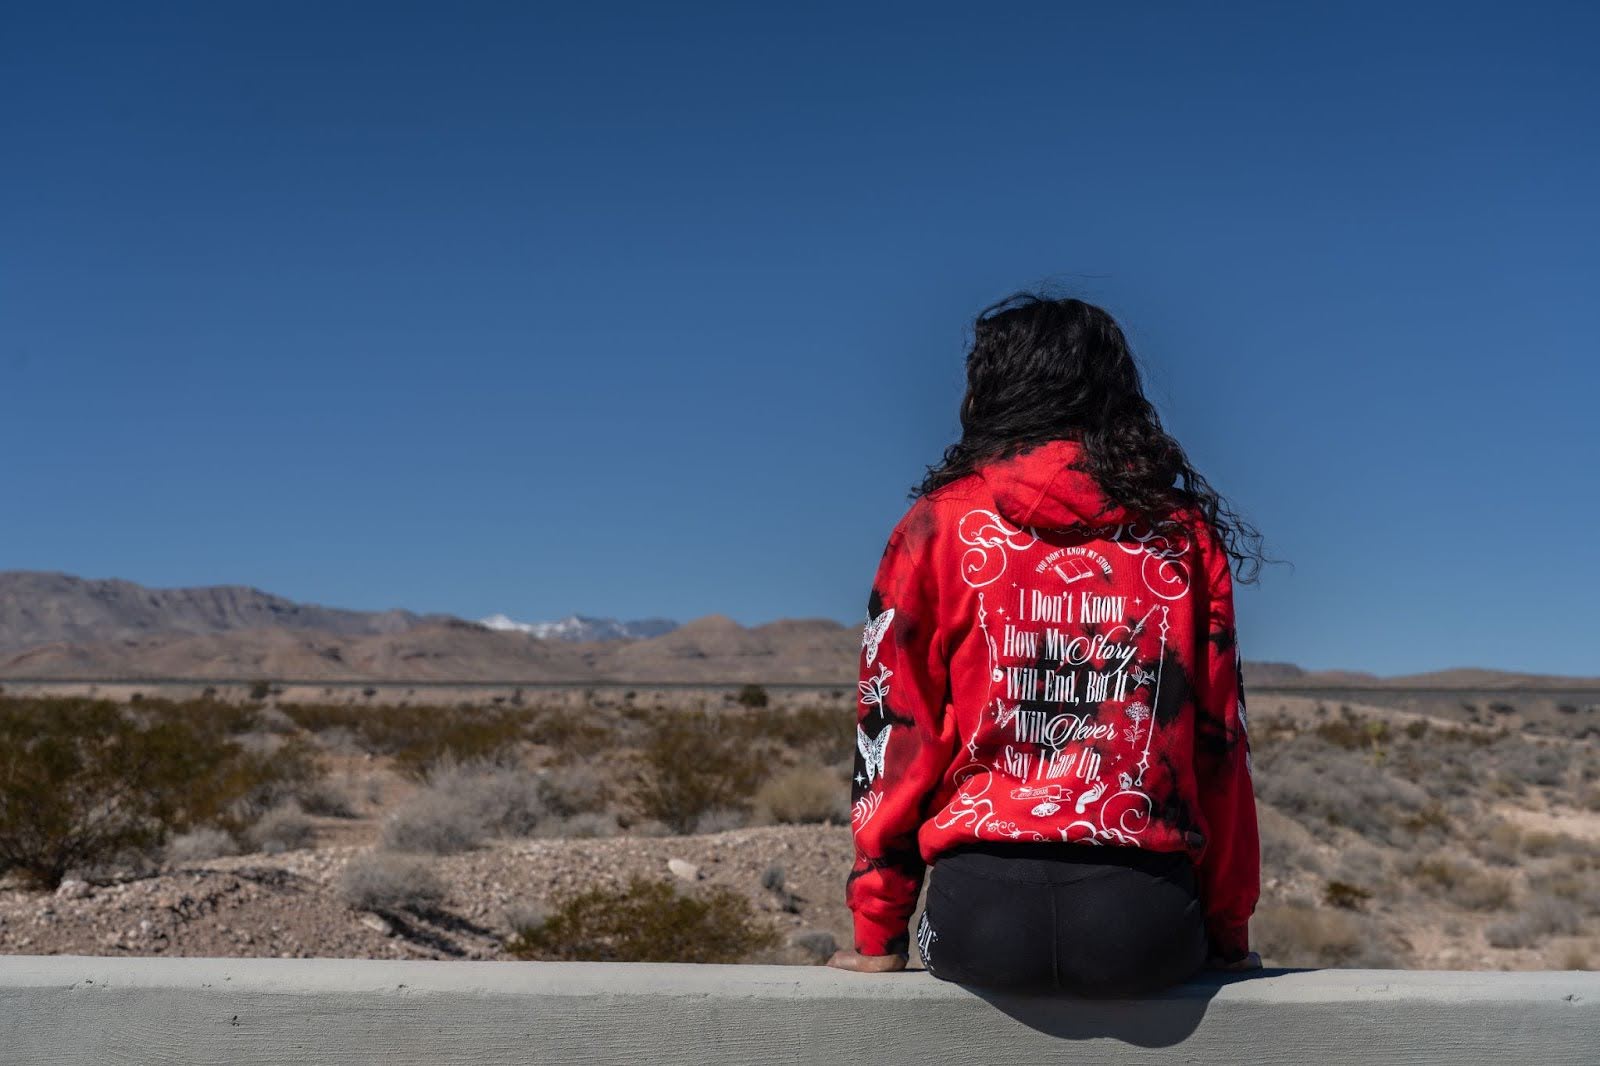 Beautiful Disaster's "You Don't Know My Story" Collection Builds a Community through Fashion